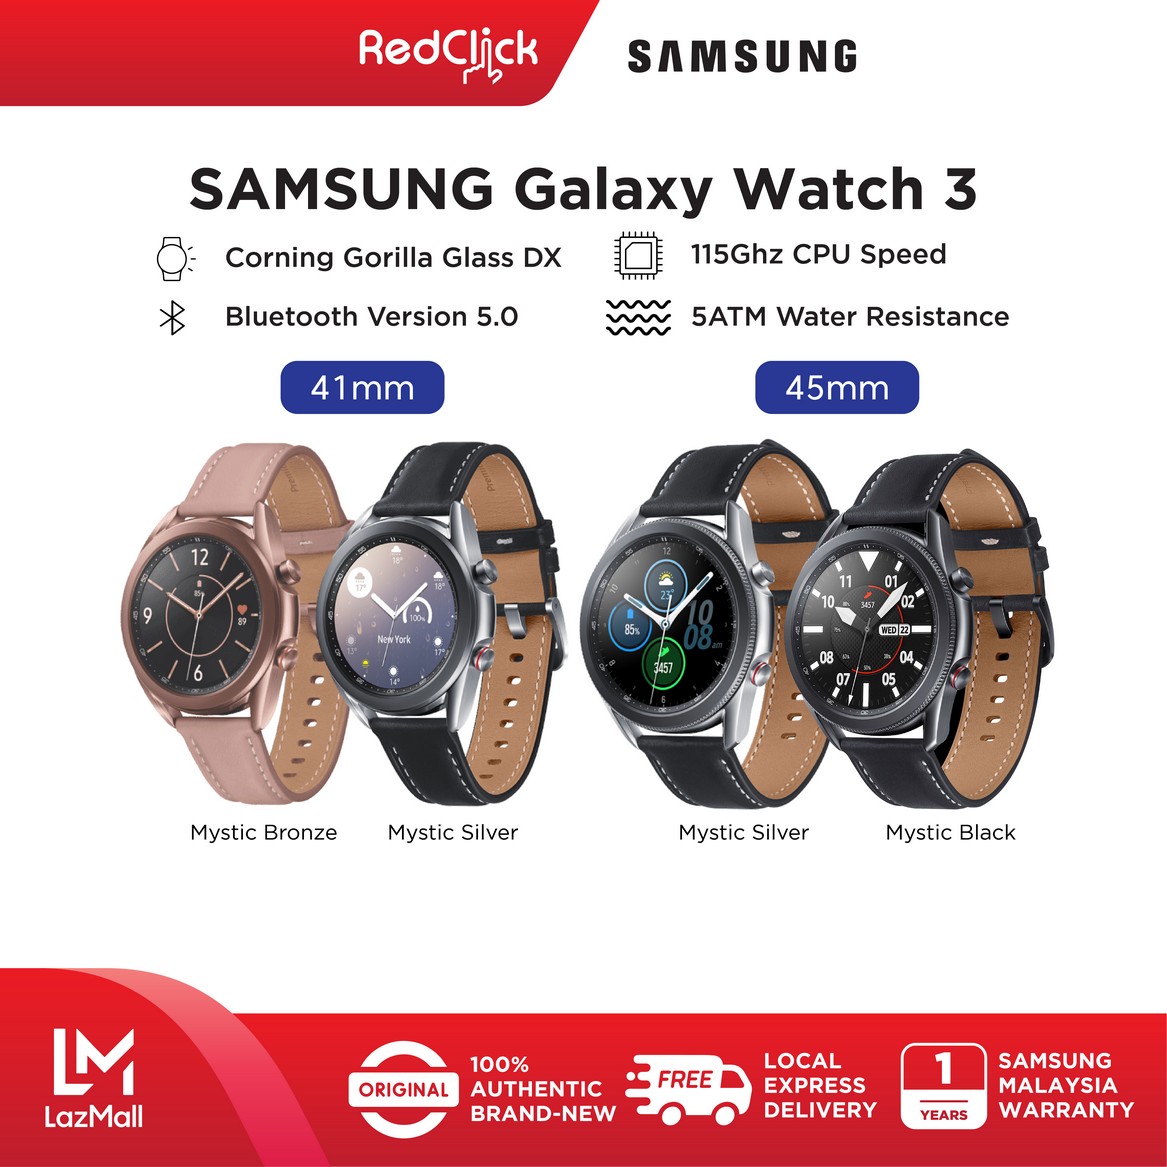 Samsung Galaxy Watch 3 (R850/41mm)(R840/45mm) Bluetooth Stainless Steel Class And Premium Dignified Design 5ATM Water Resistant Support GPS Smart Watch + Free Gift